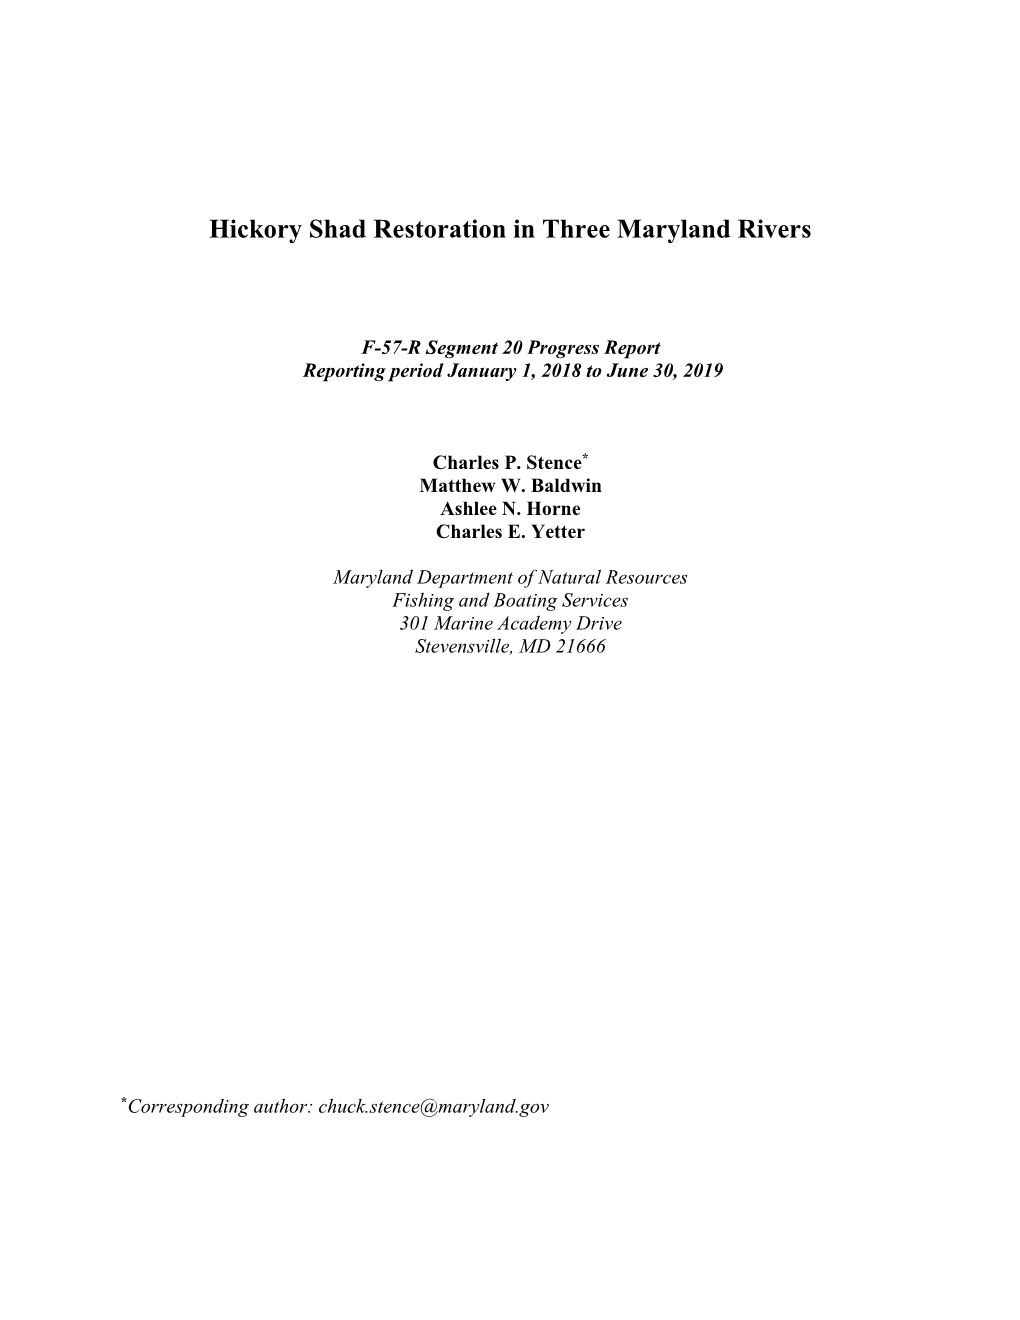 2018-19 Hickory Shad Restoration in Three Maryland Rivers Figures And